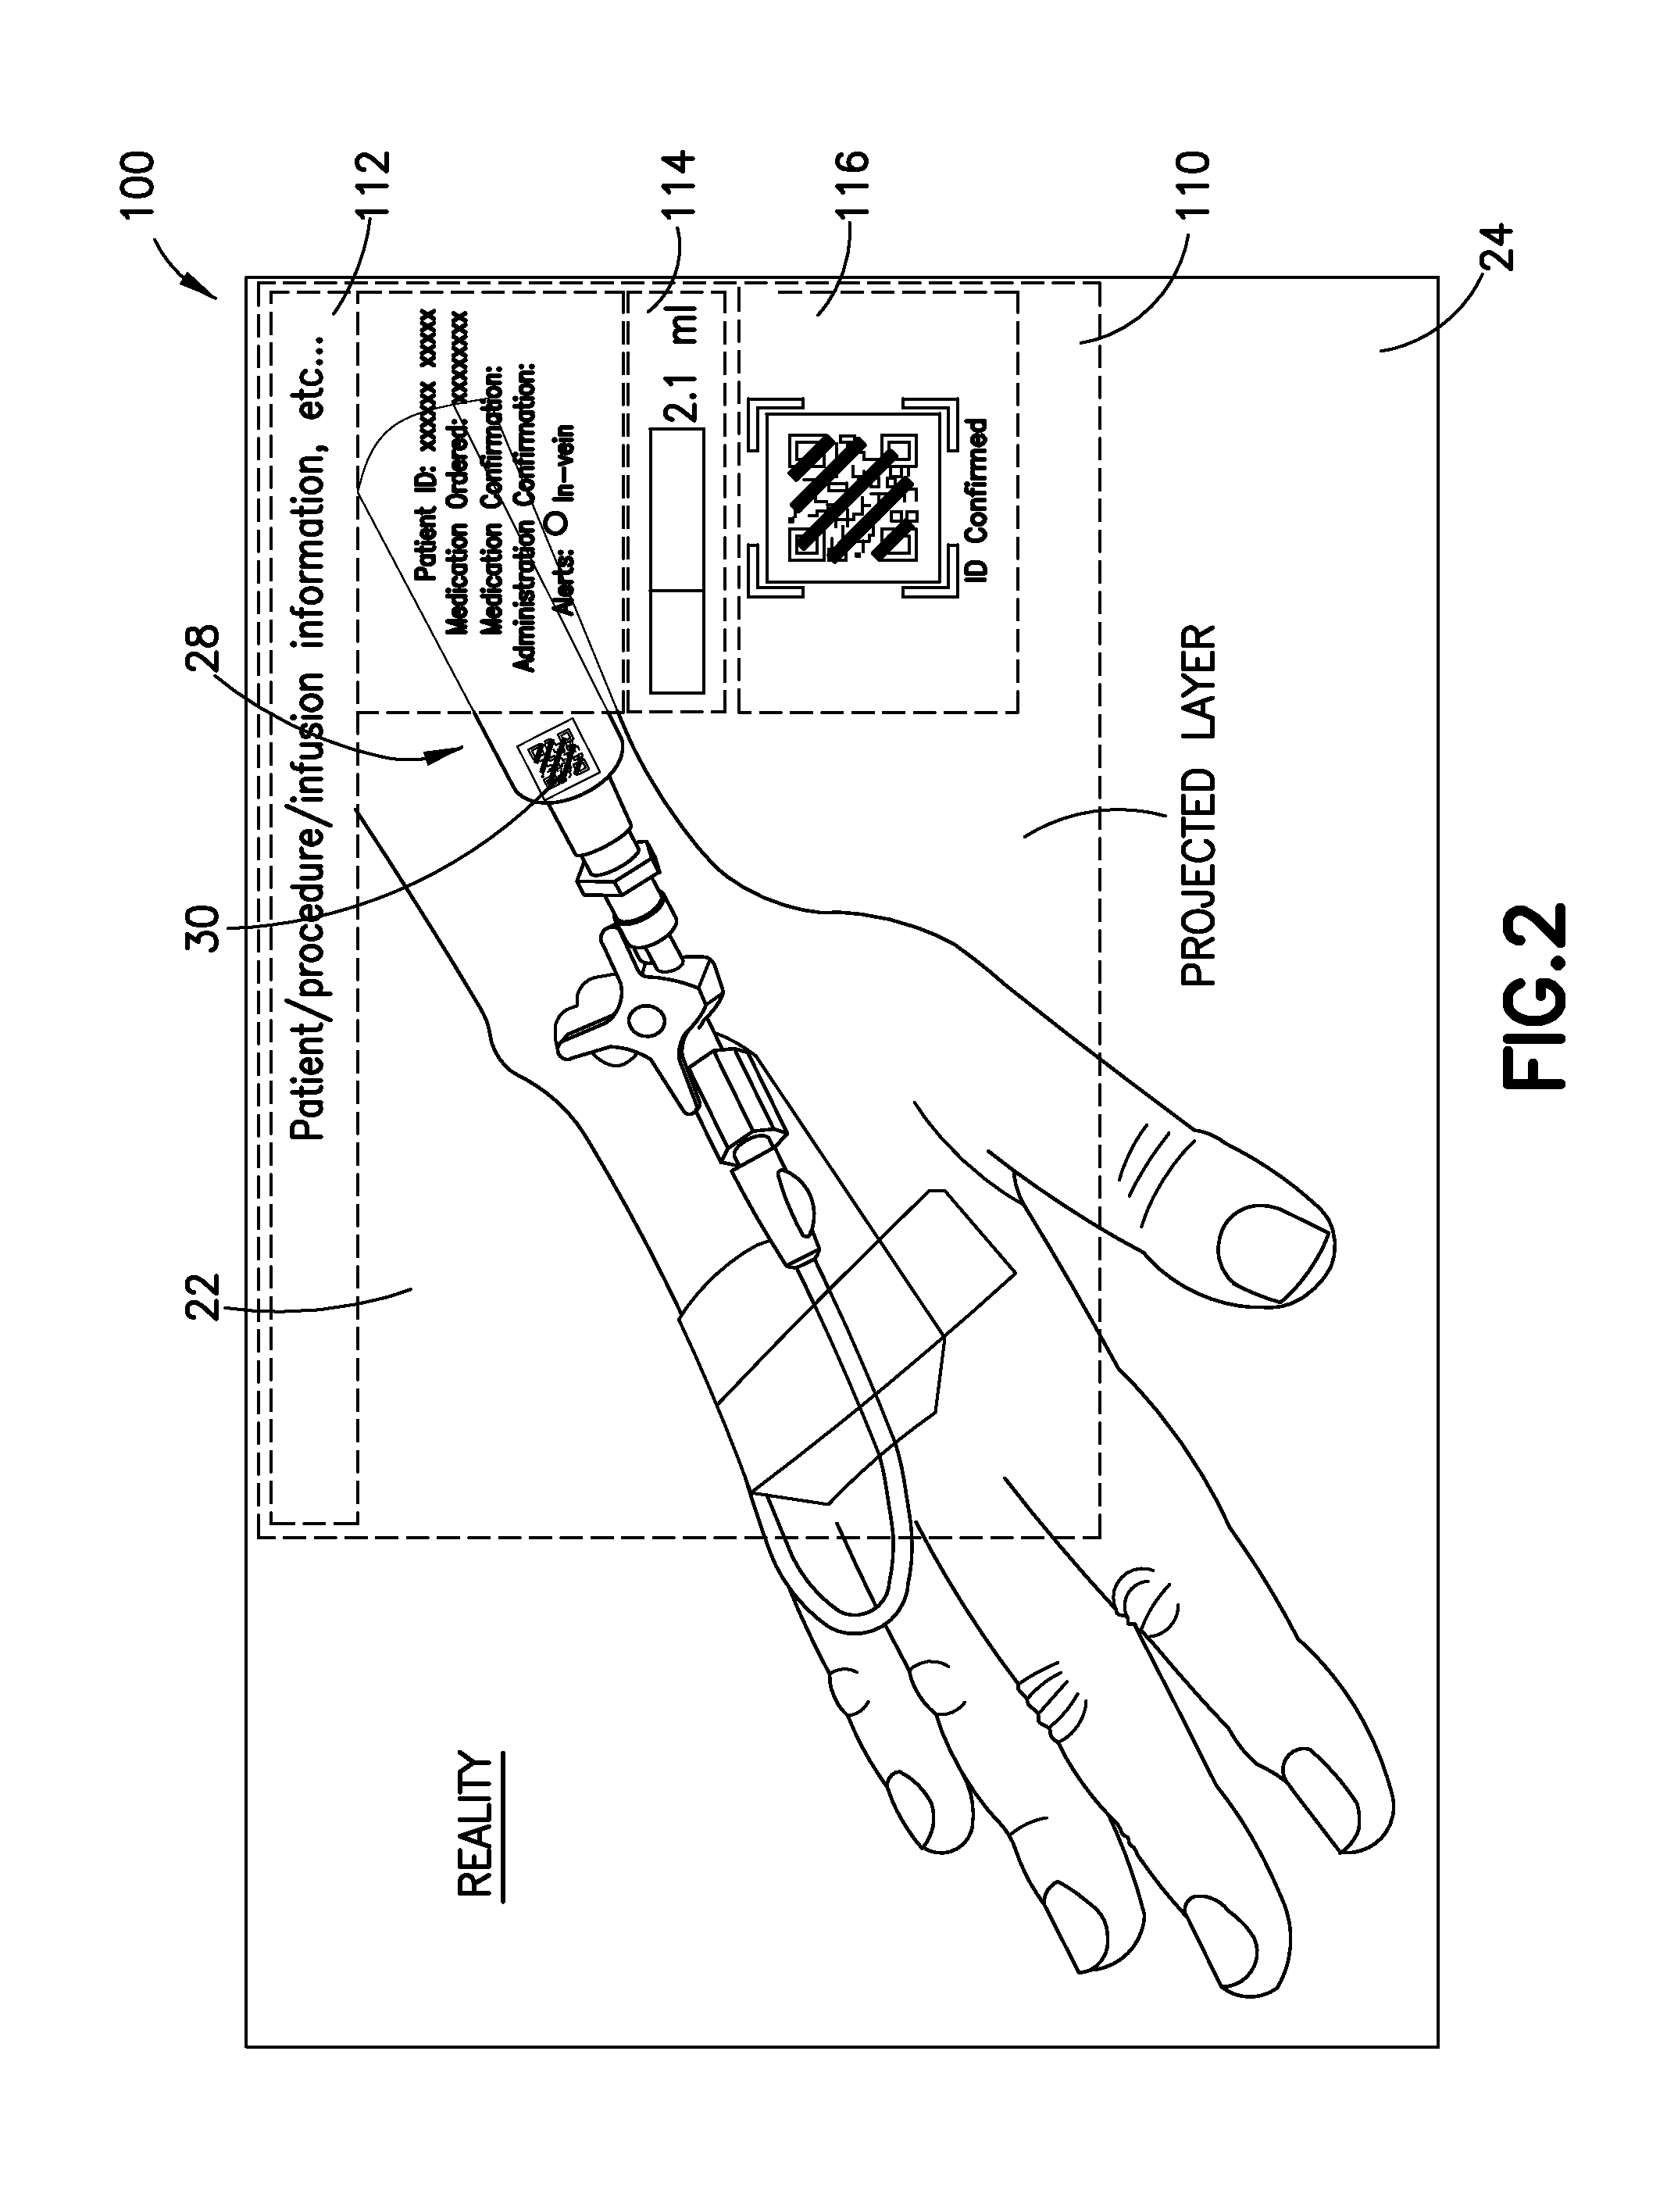 System and Method for Collection Confirmation and Sample Tracking at the Clinical Point of Use